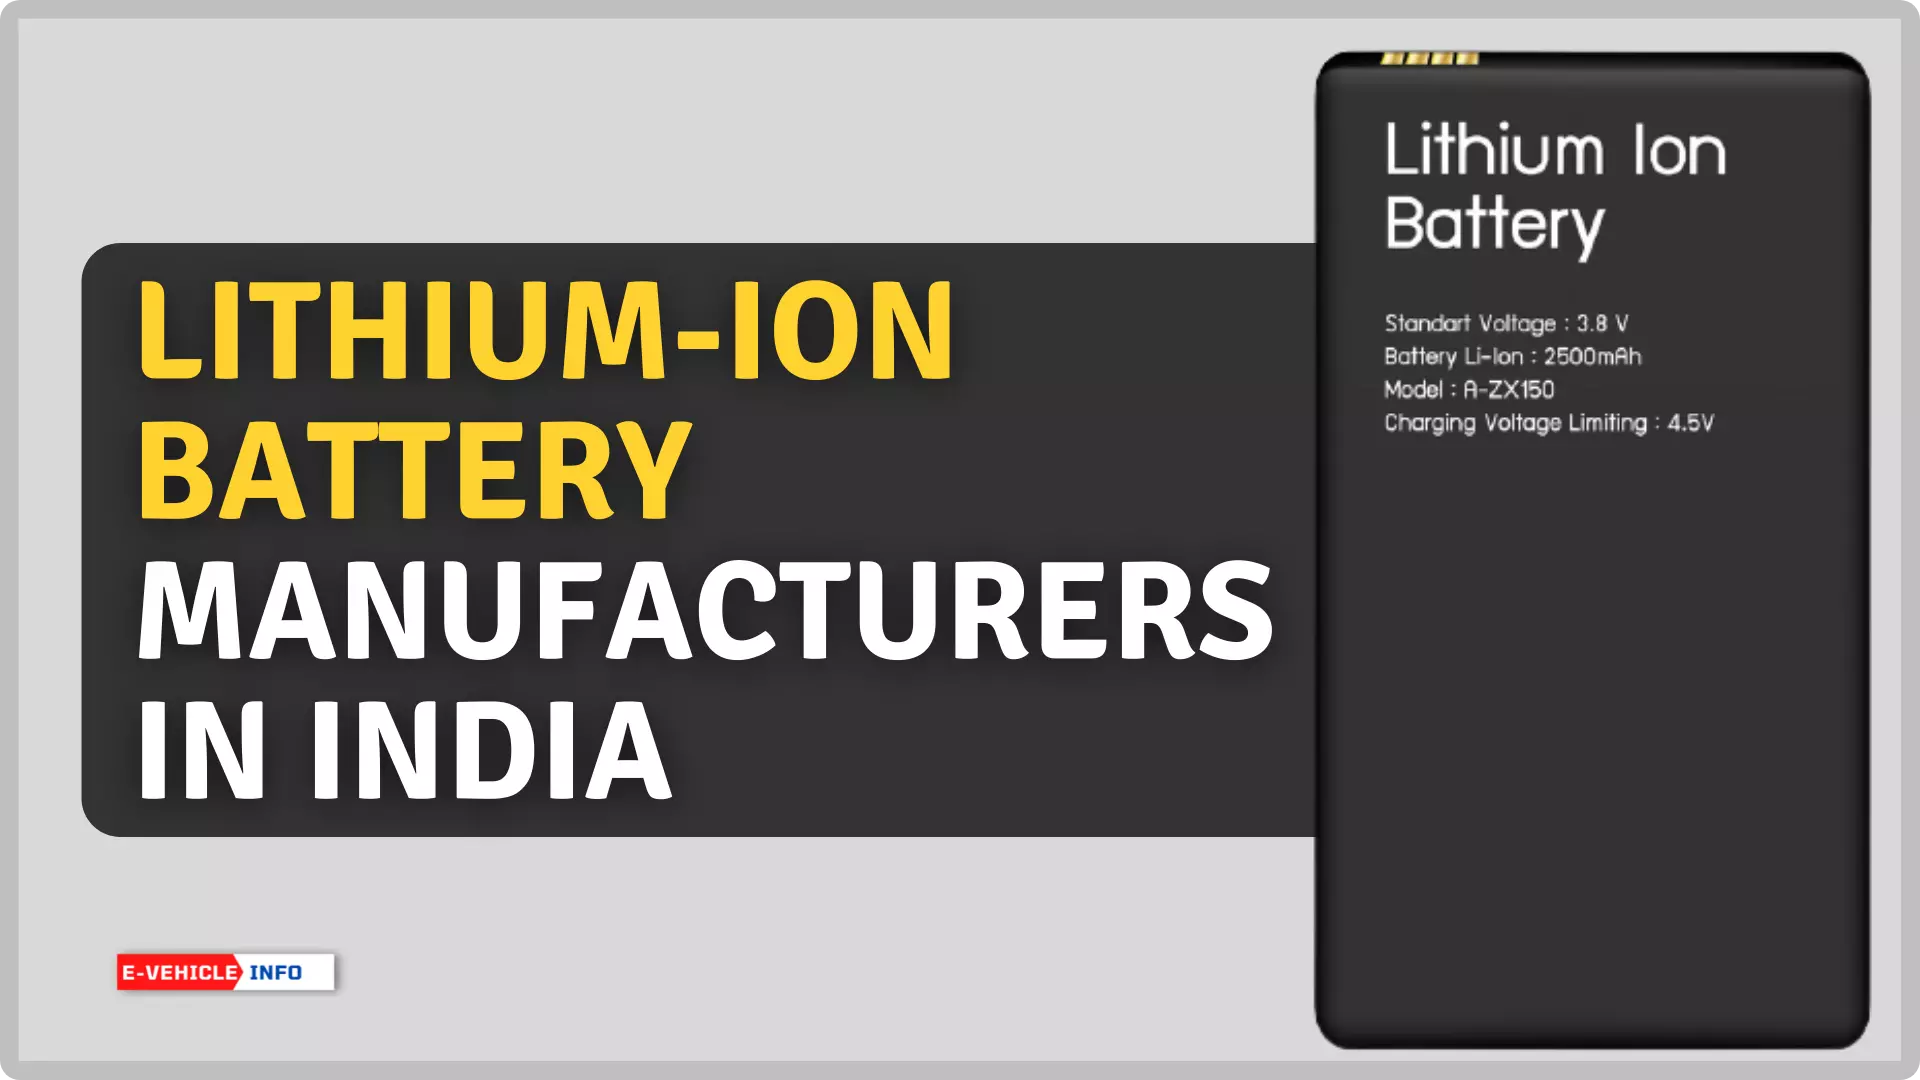 https://e-vehicleinfo.com/top-9-lithium-ion-battery-manufacturers-in-india/